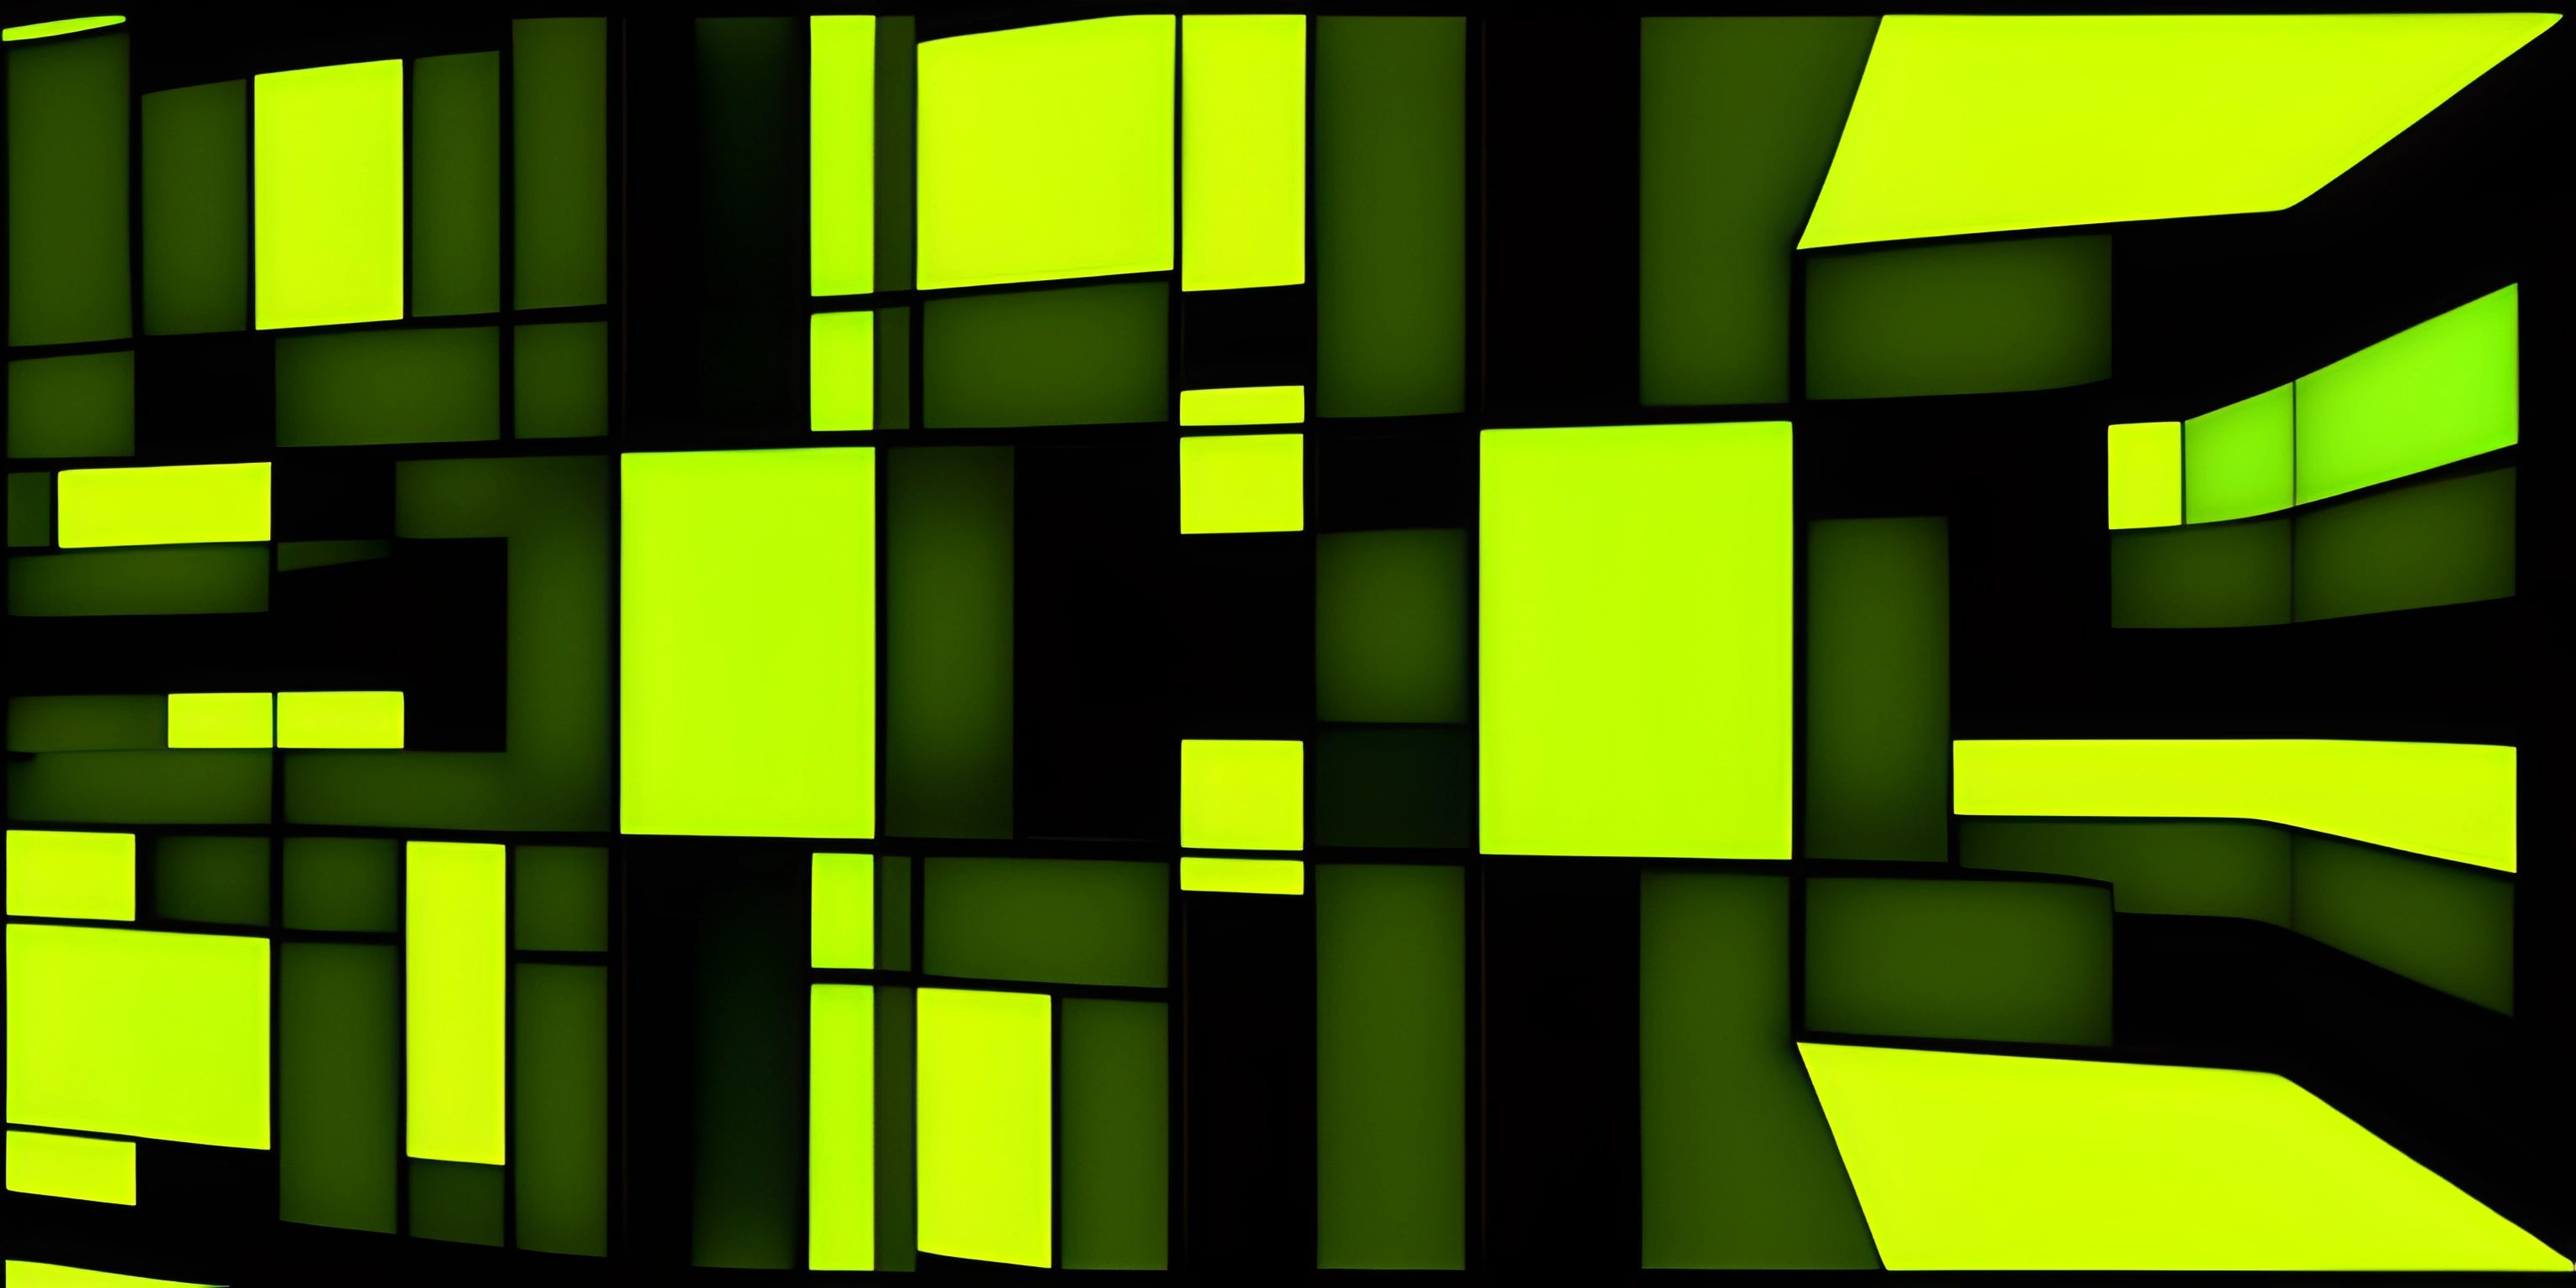 3d abstract pattern of squares green on black background animation of a computer generated illustration of a computer generated design